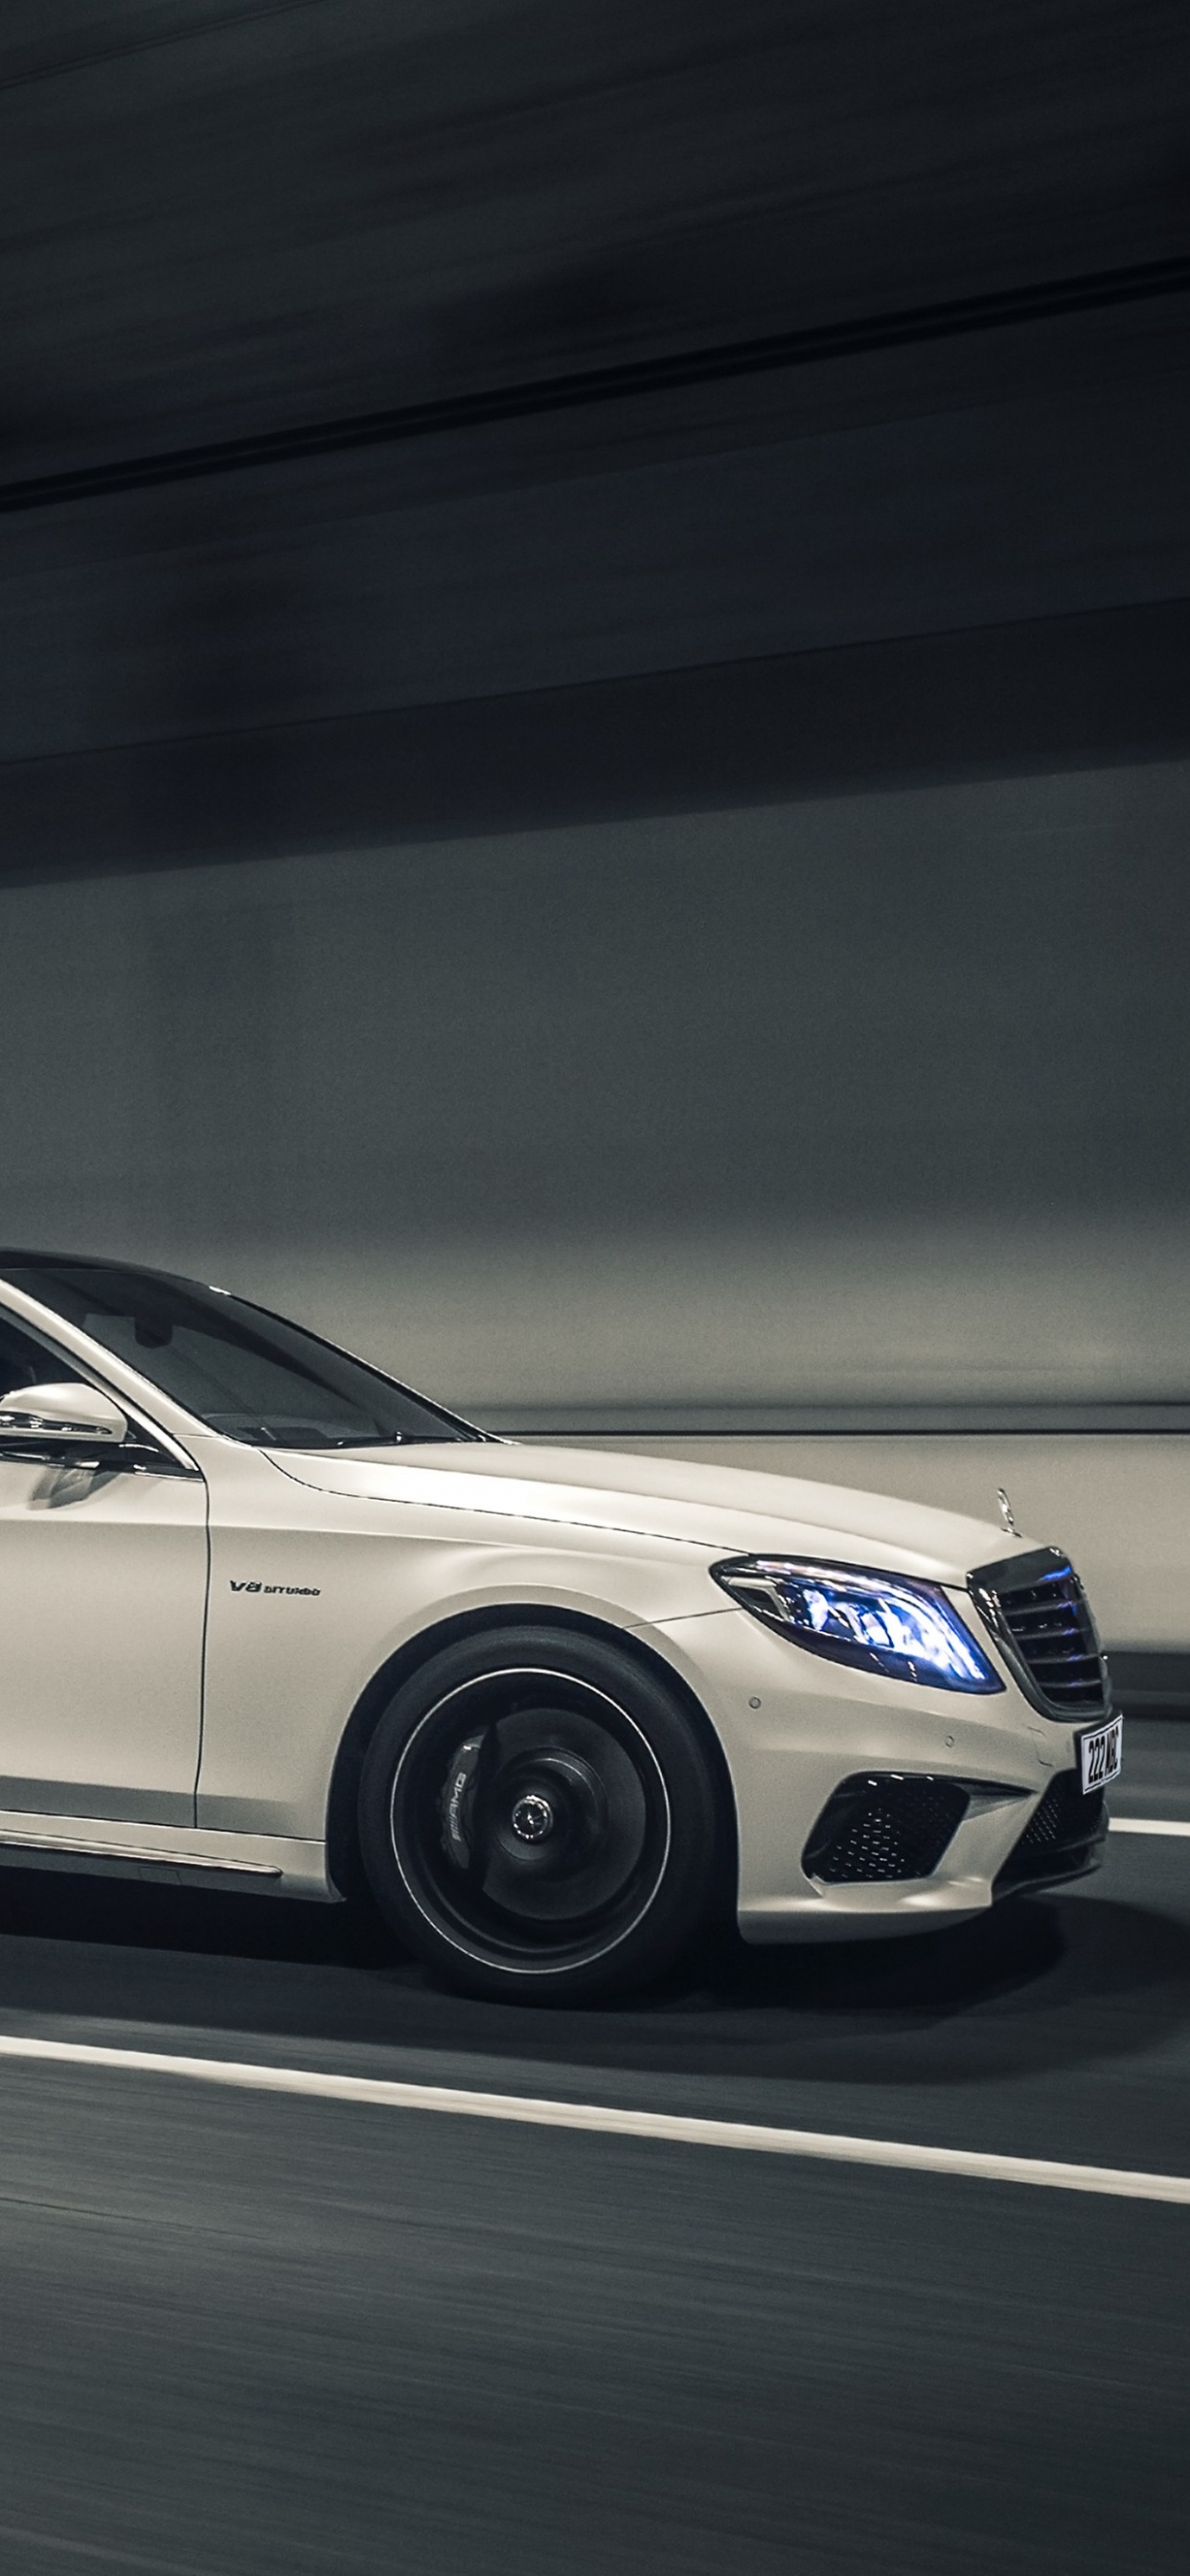 White Mercedes Benz Coupe on Road. Wallpaper in 1242x2688 Resolution